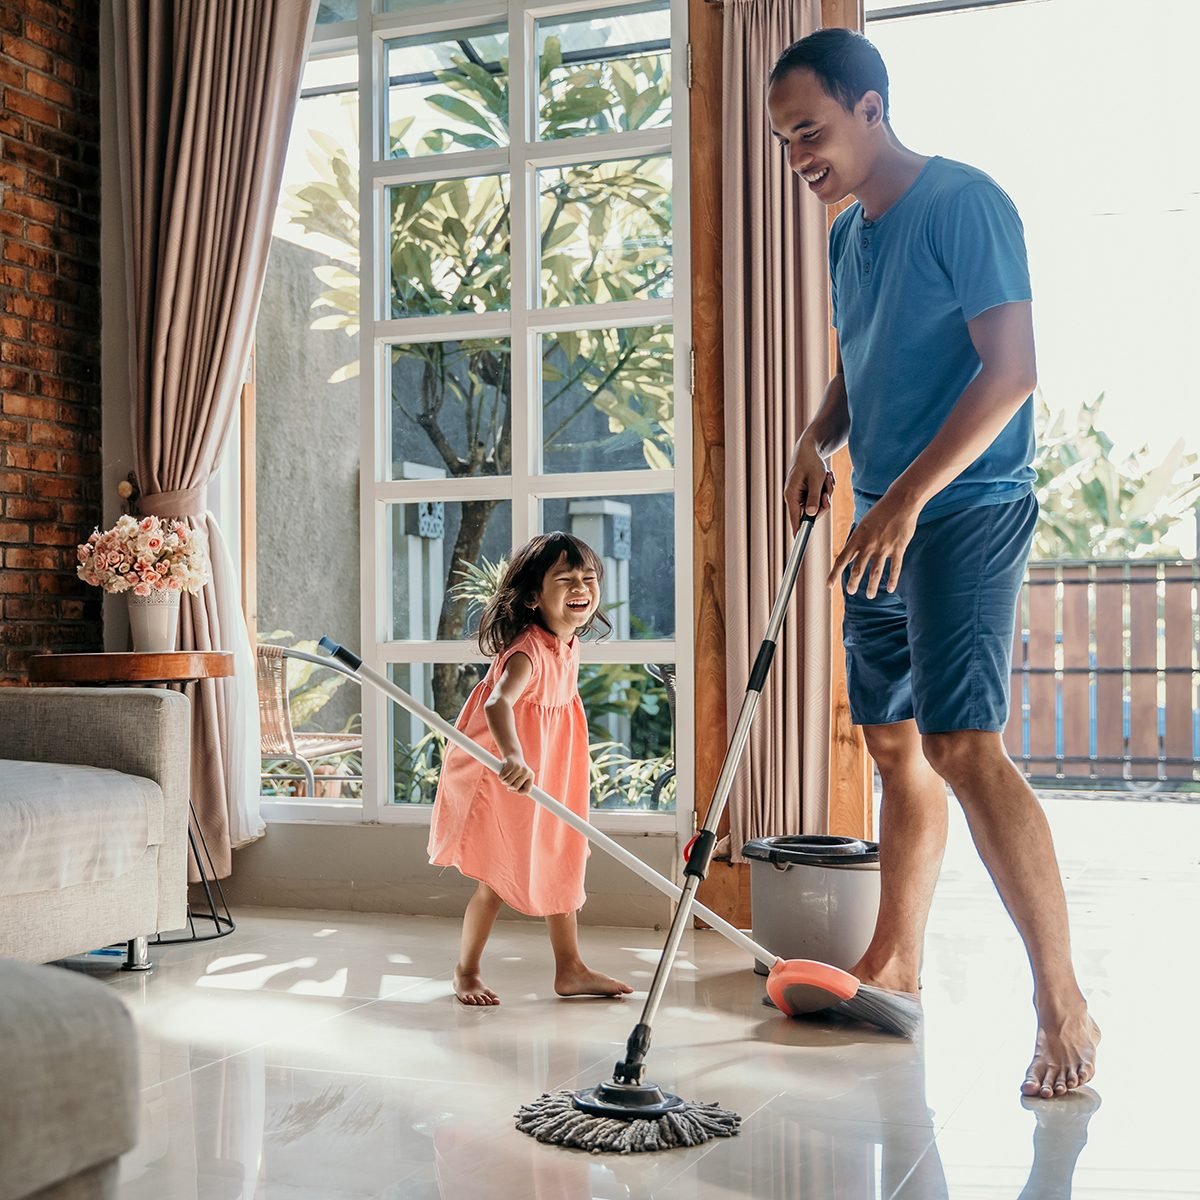 Cleaning Tips to Reduce Household Dust